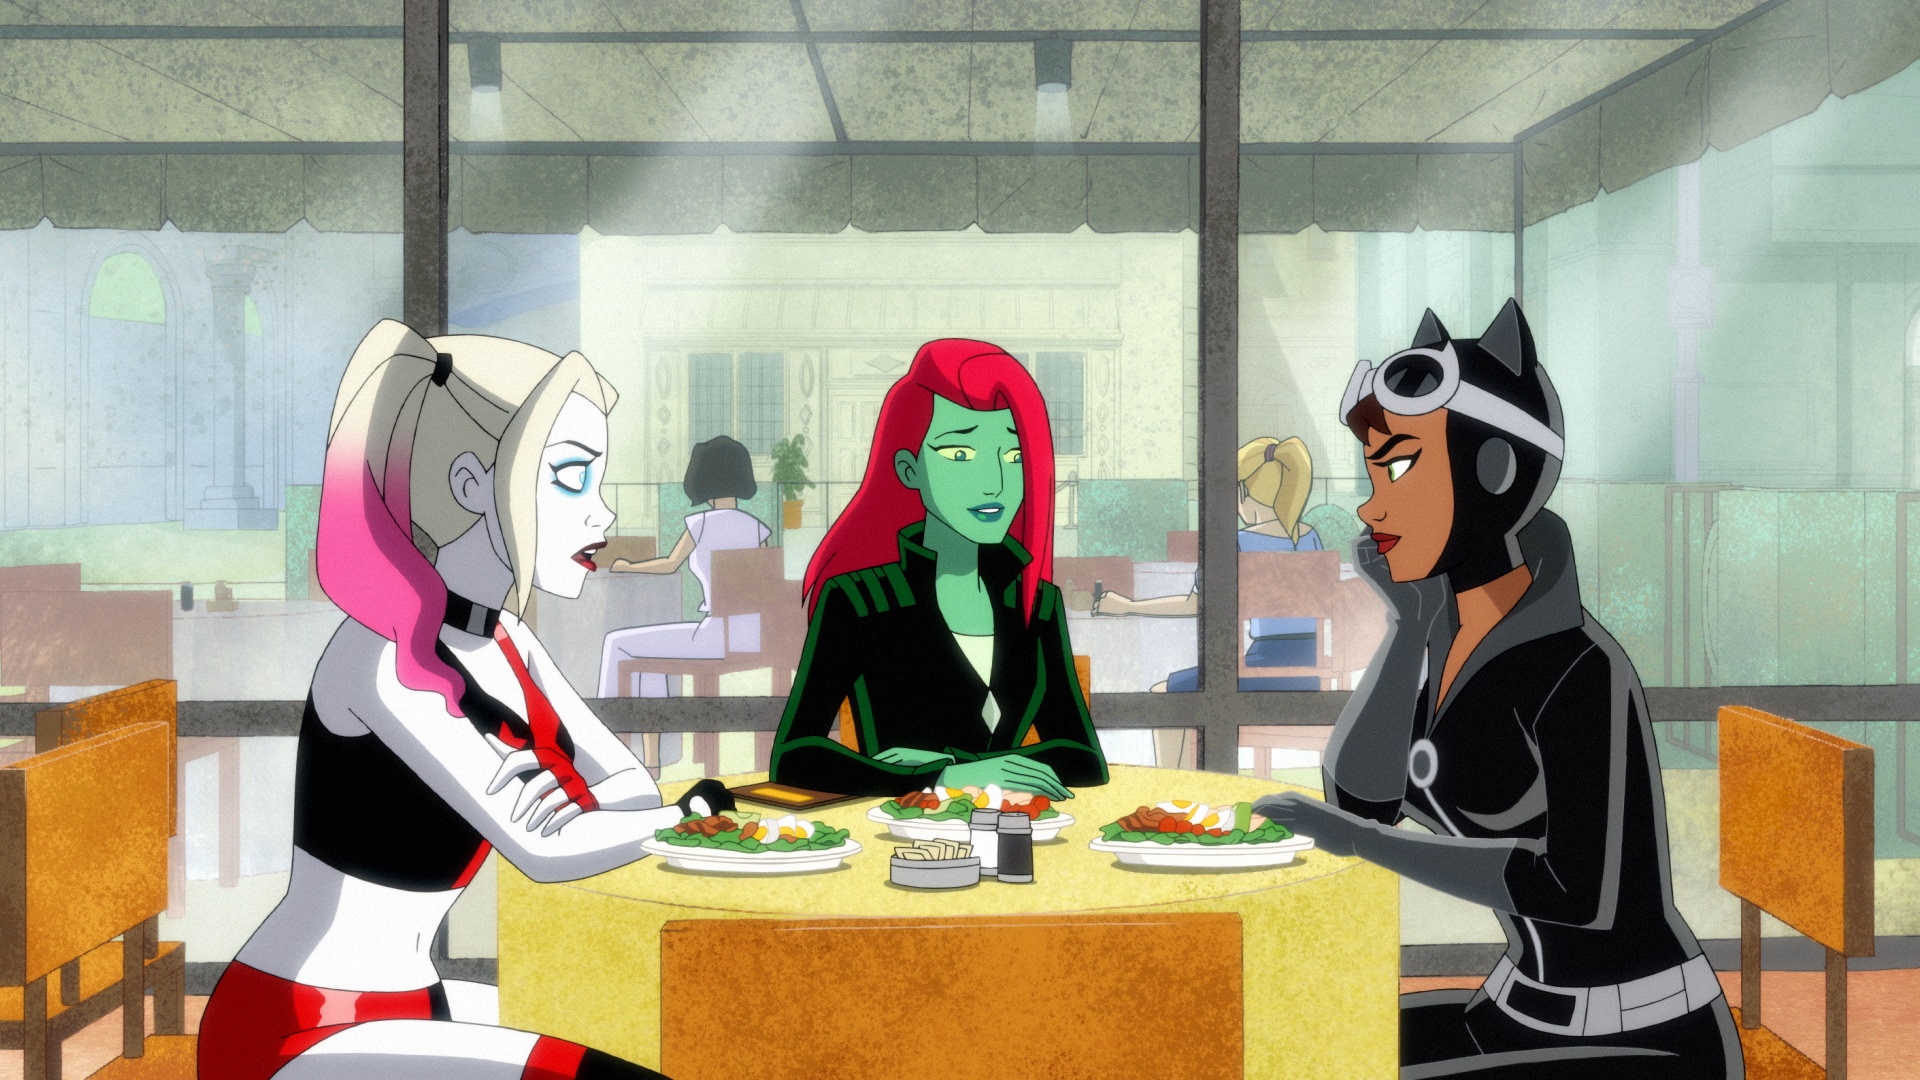 Harley, Ivy, and Catwoman discuss business